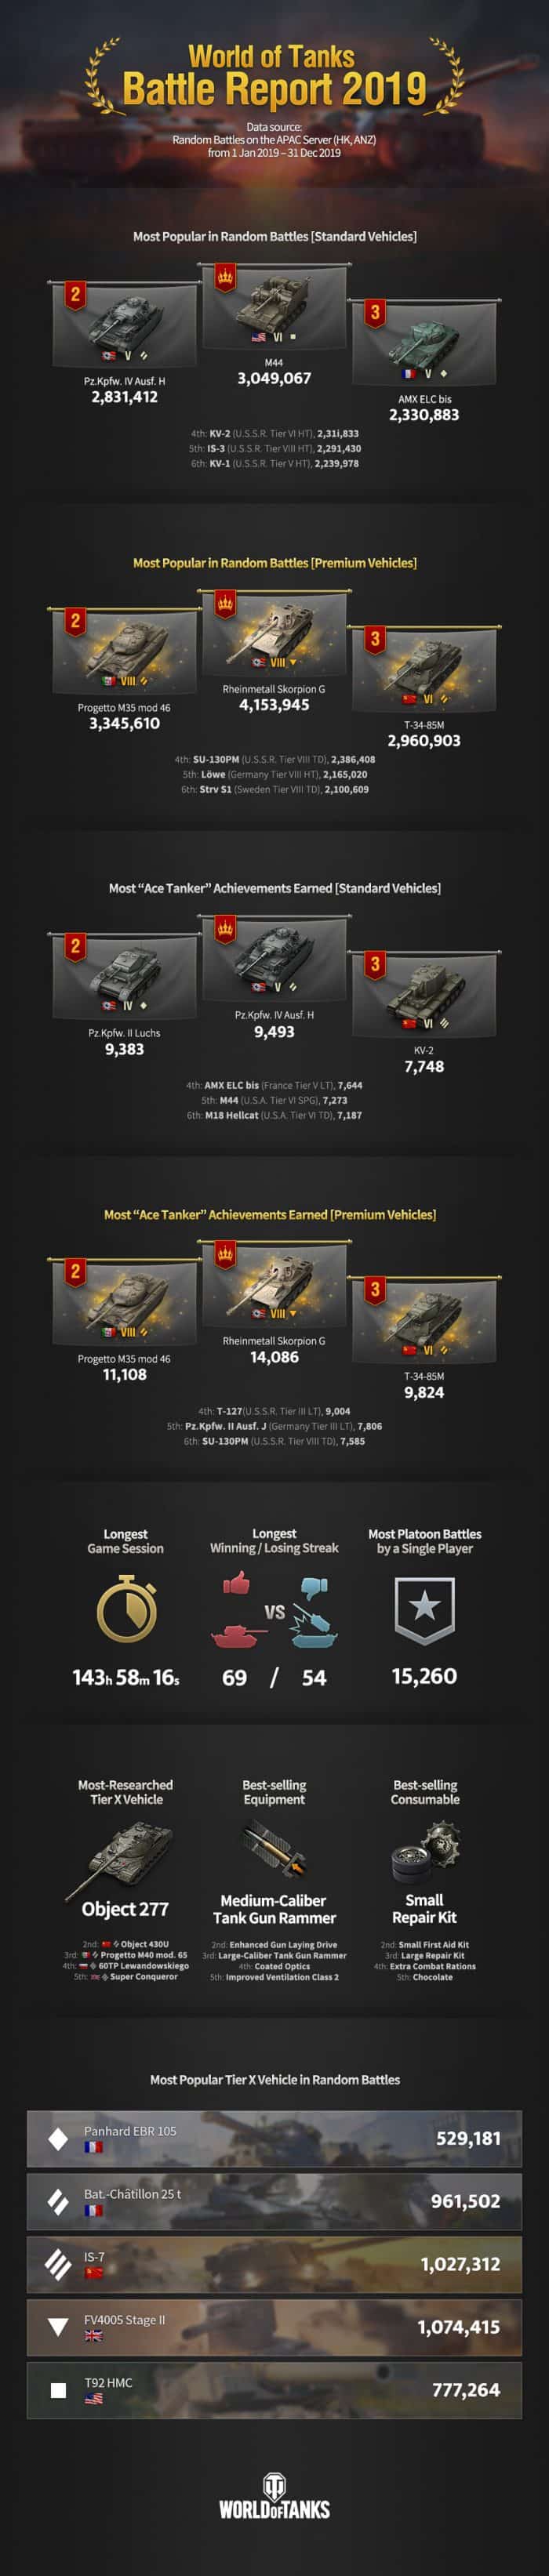 Best and Most Popular Tanks to play with in World of Tanks